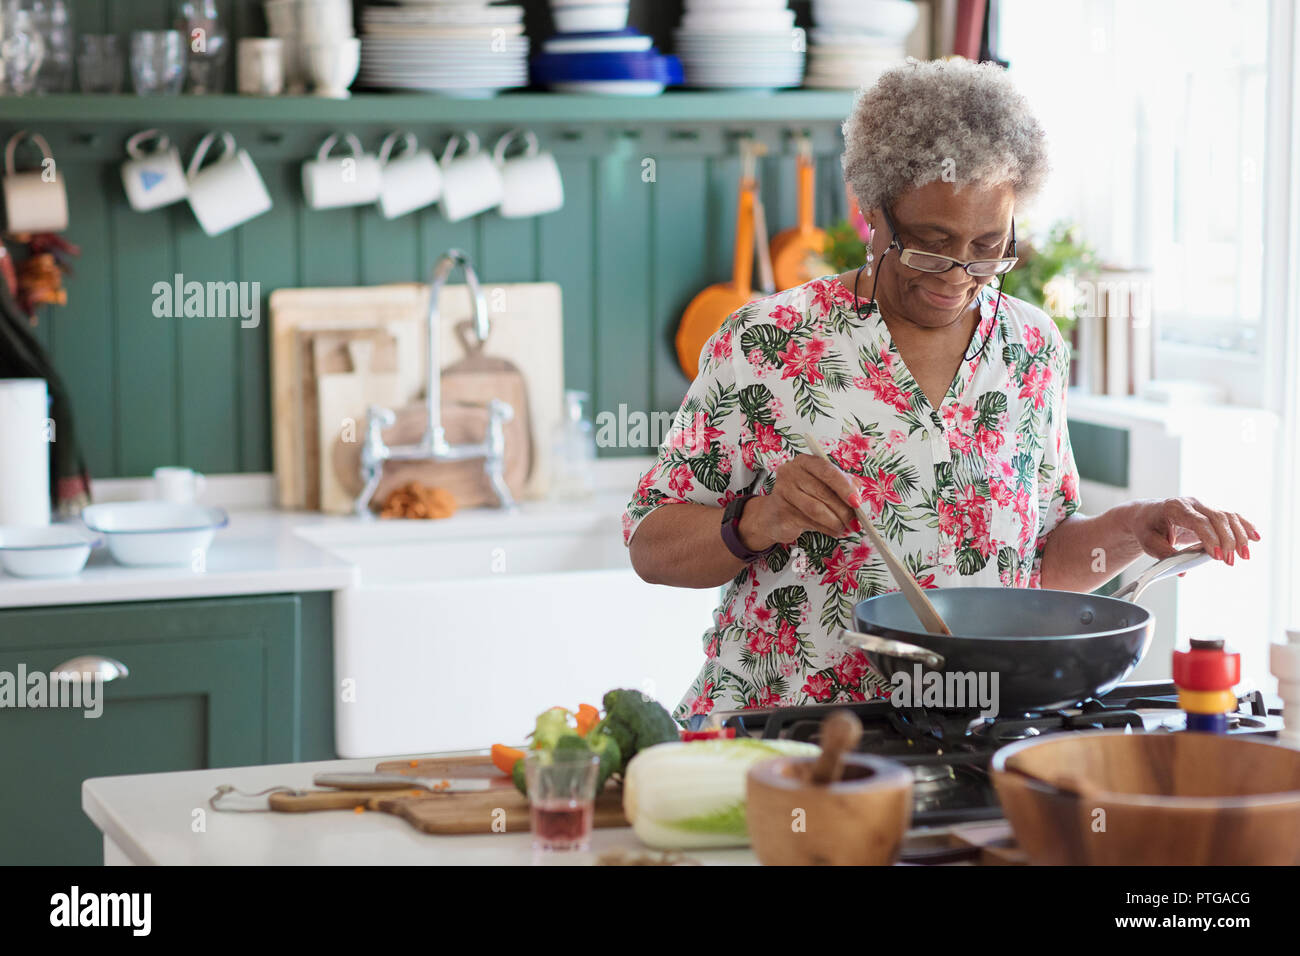 Active senior woman cooking in kitchen Stock Photo